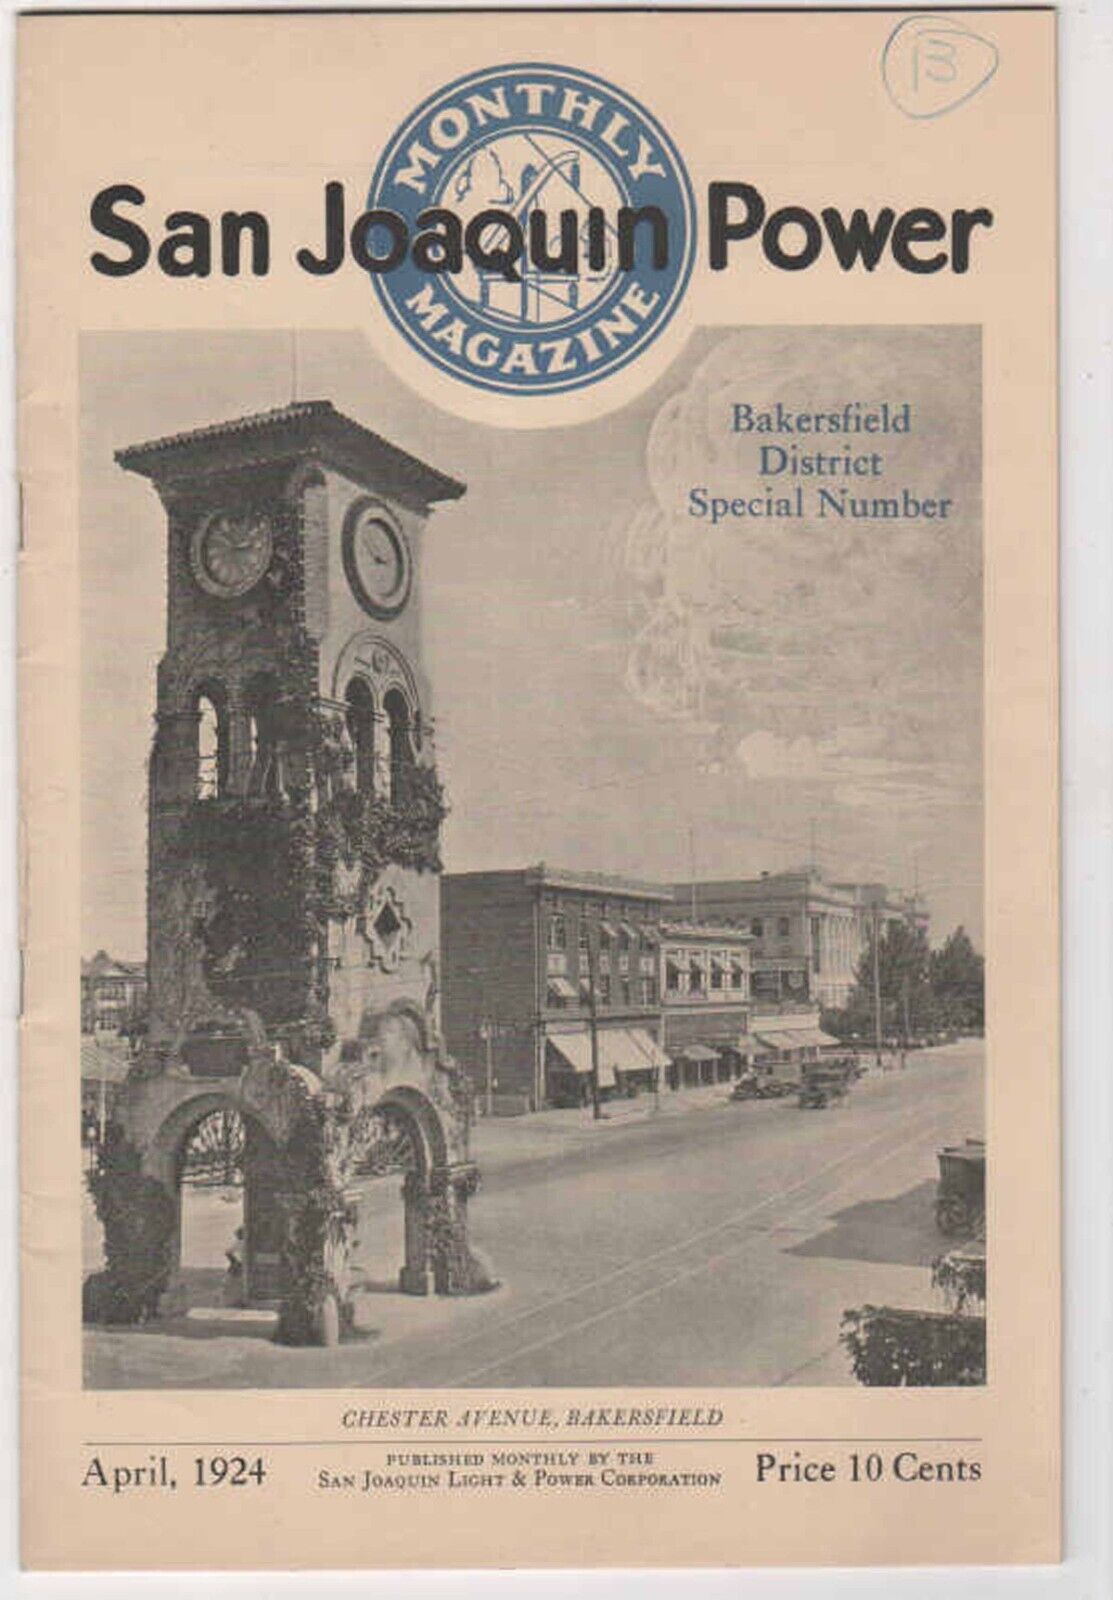 1924 HISTORICAL SAN JOAQUIN POWER BAKERSFIELD DISTRICT SPECIAL # MAGAZINE OIL++